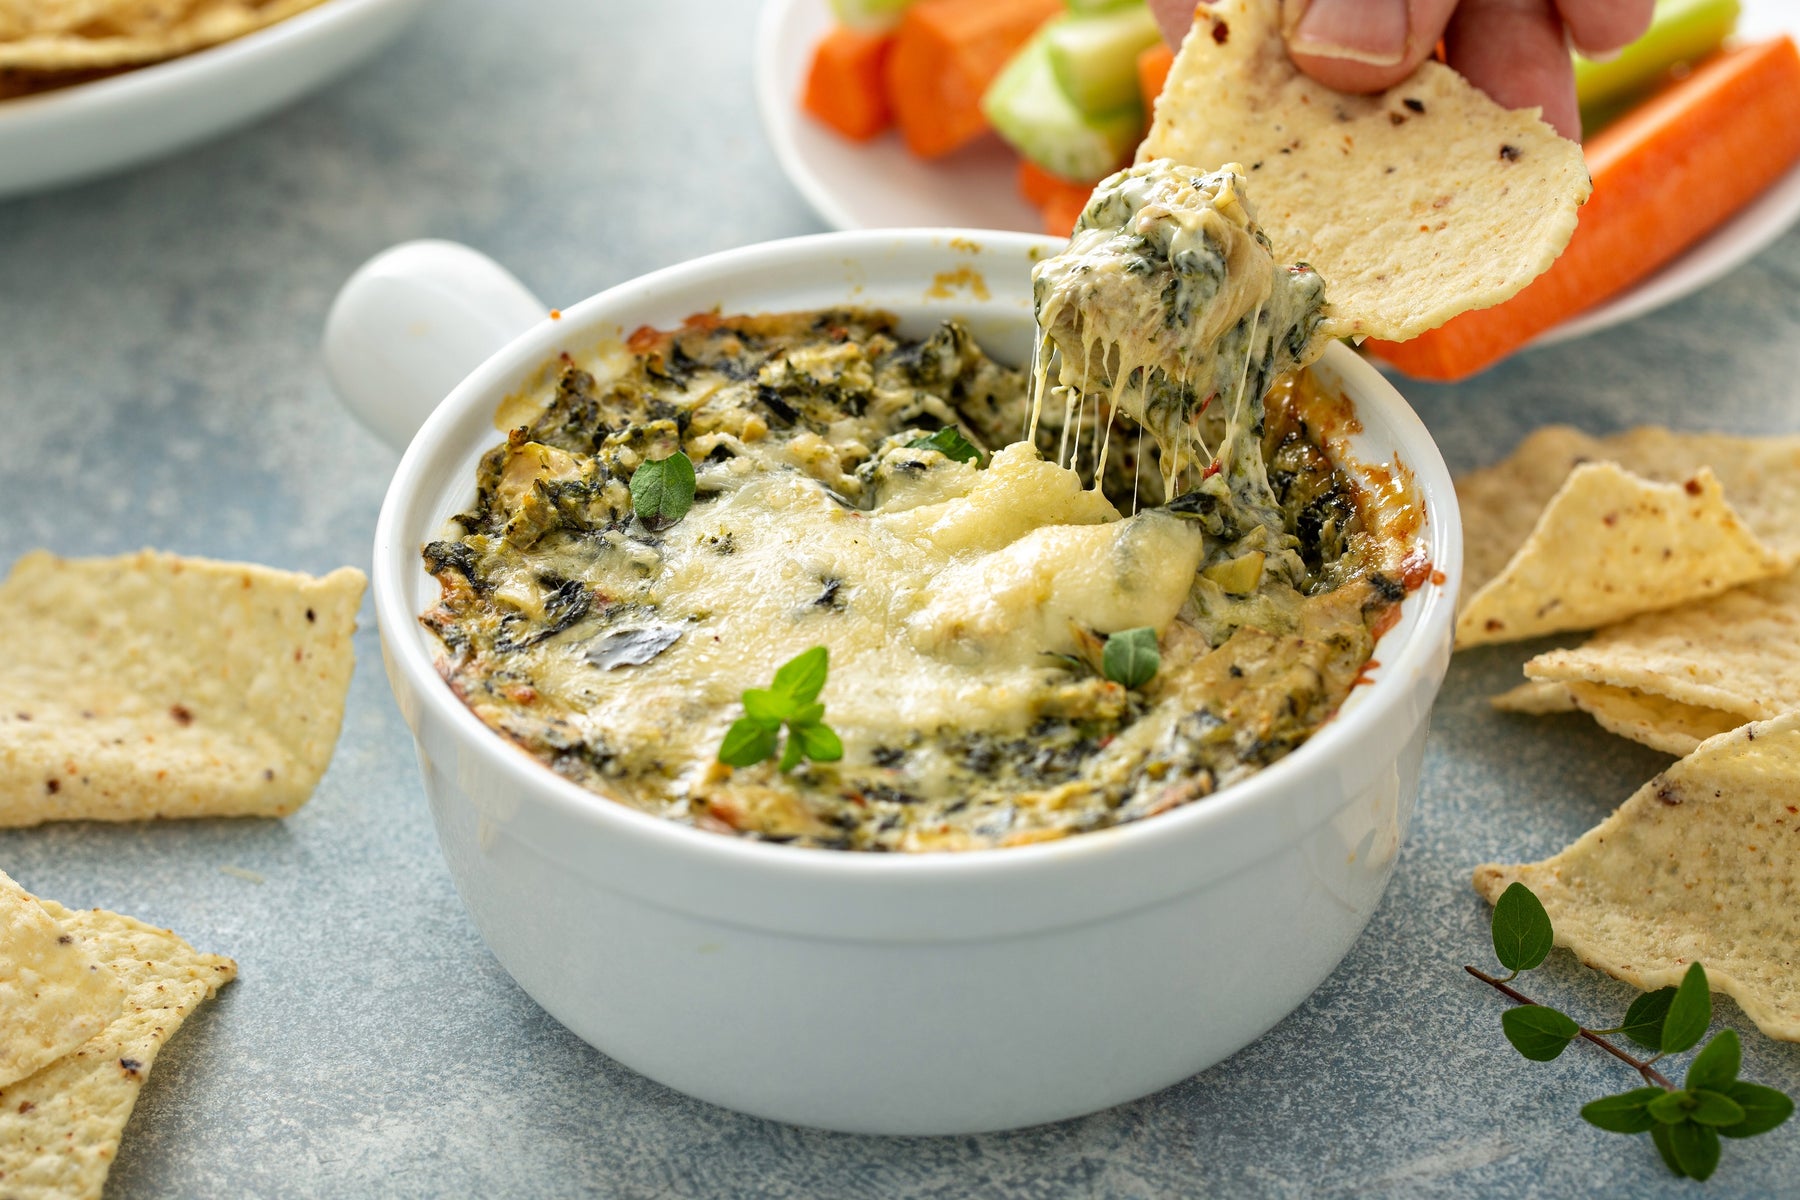 How to Make Creamy Spinach and Artichoke Dip